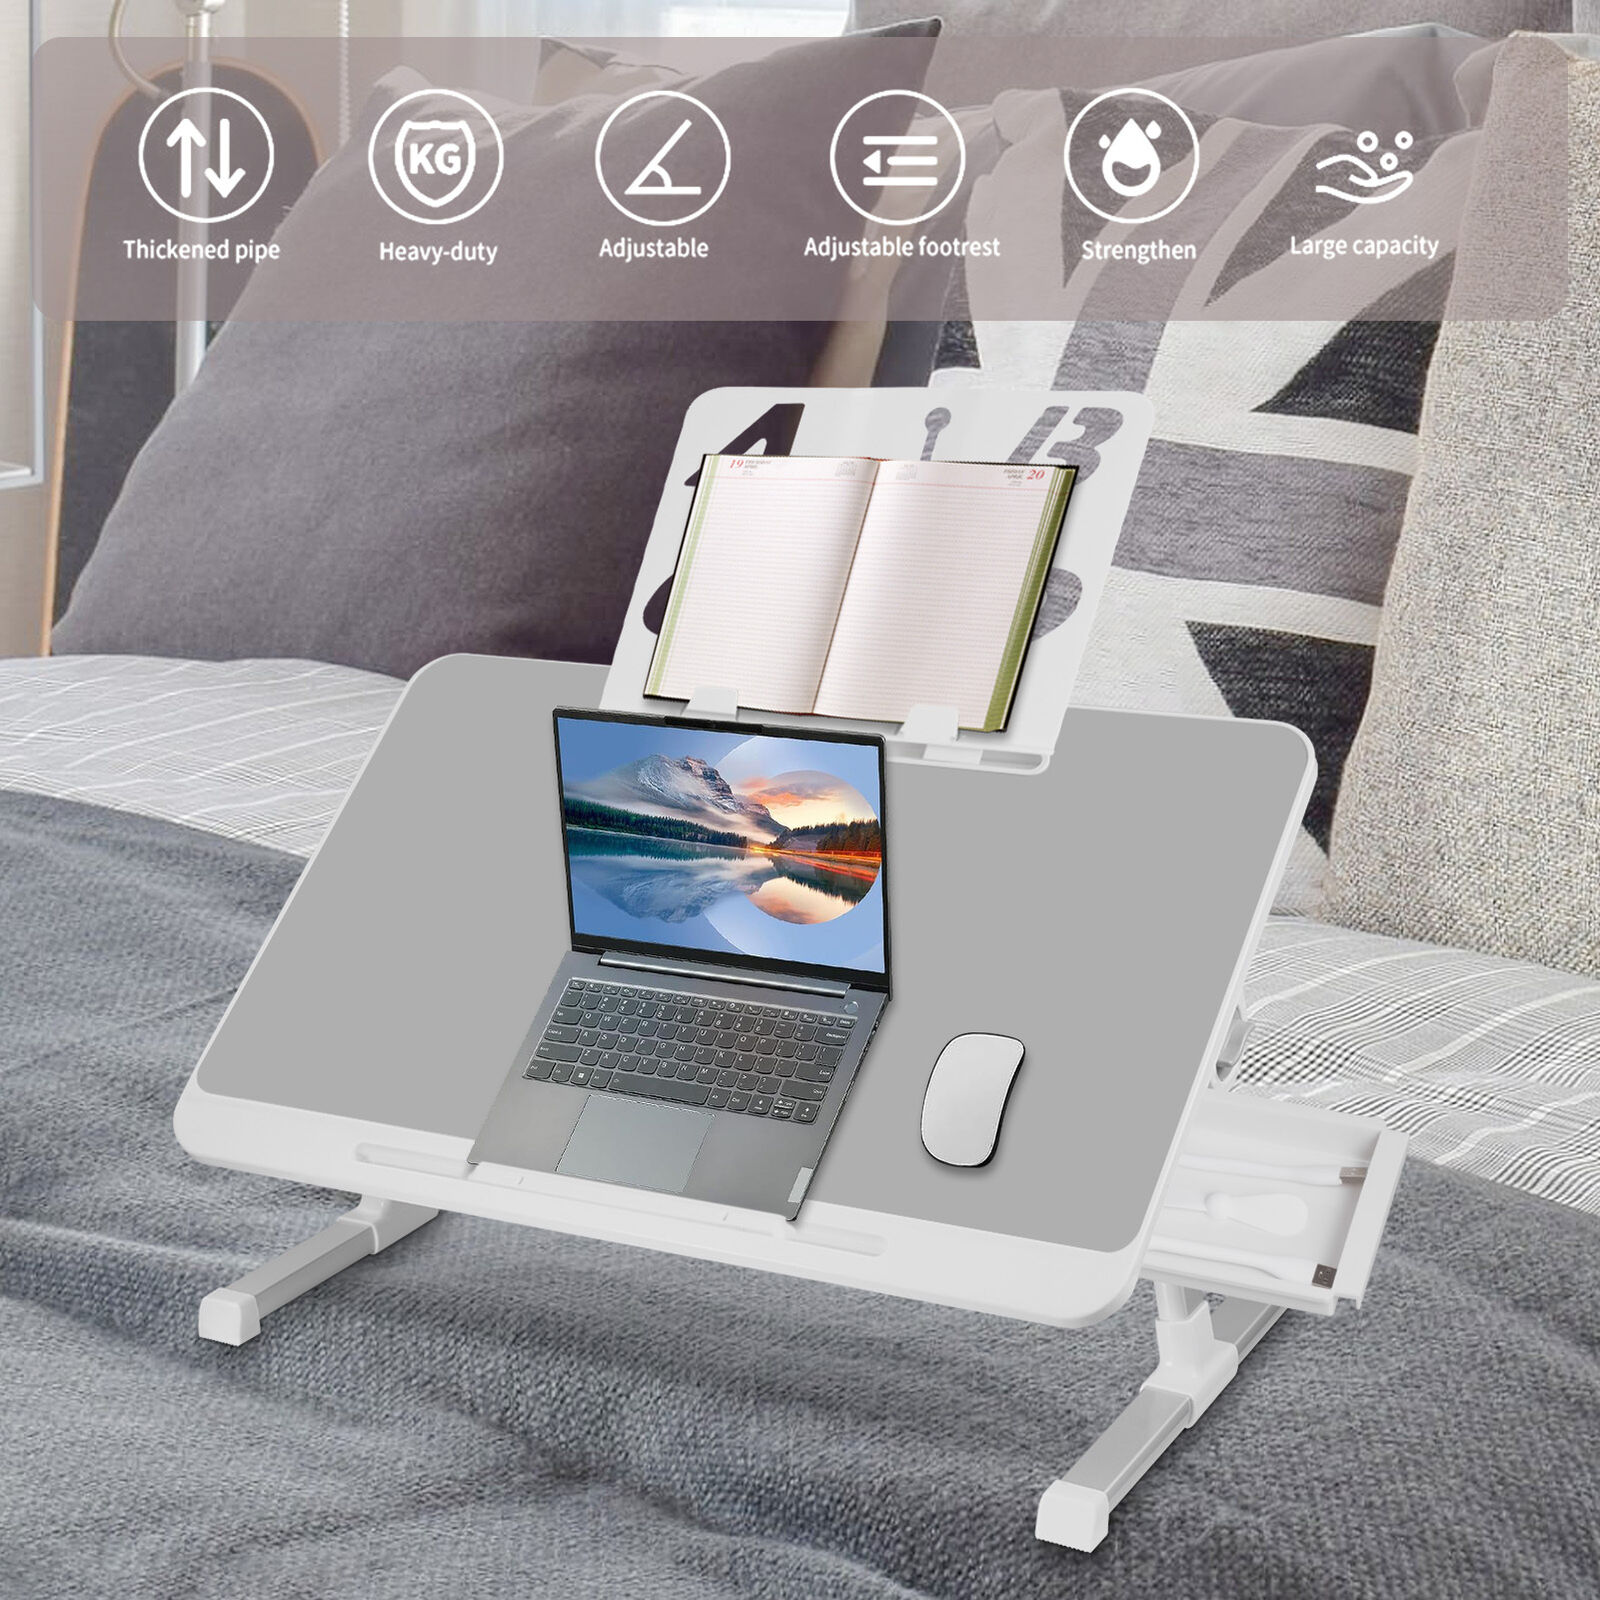 Bed Table Tray Portable Laptop Bed Tray with Folding Legs Laptop Bed Tray innate